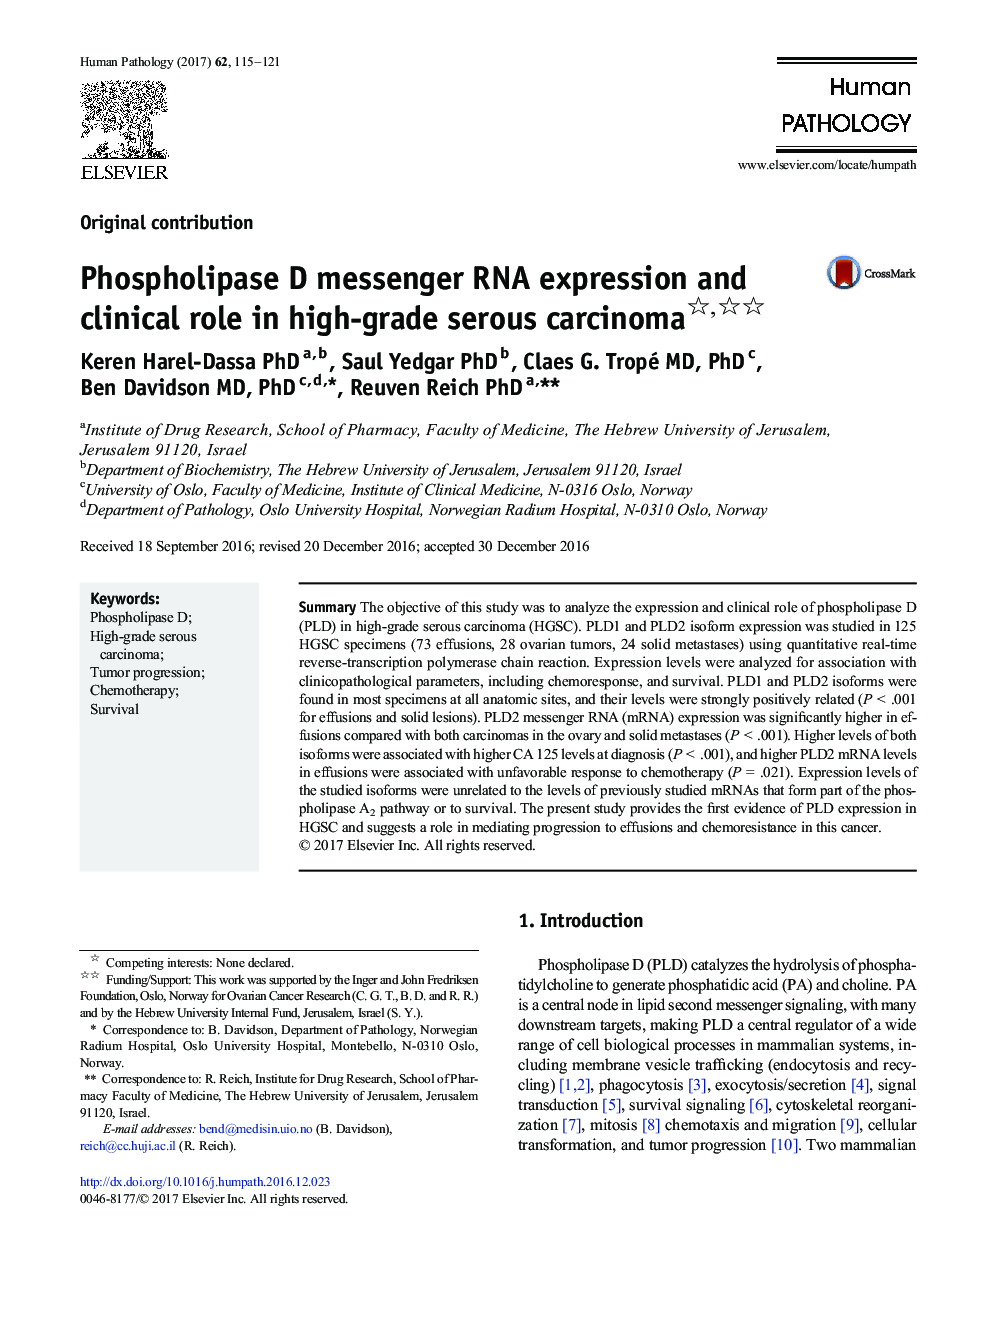 Original contributionPhospholipase D messenger RNA expression and clinical role in high-grade serous carcinoma